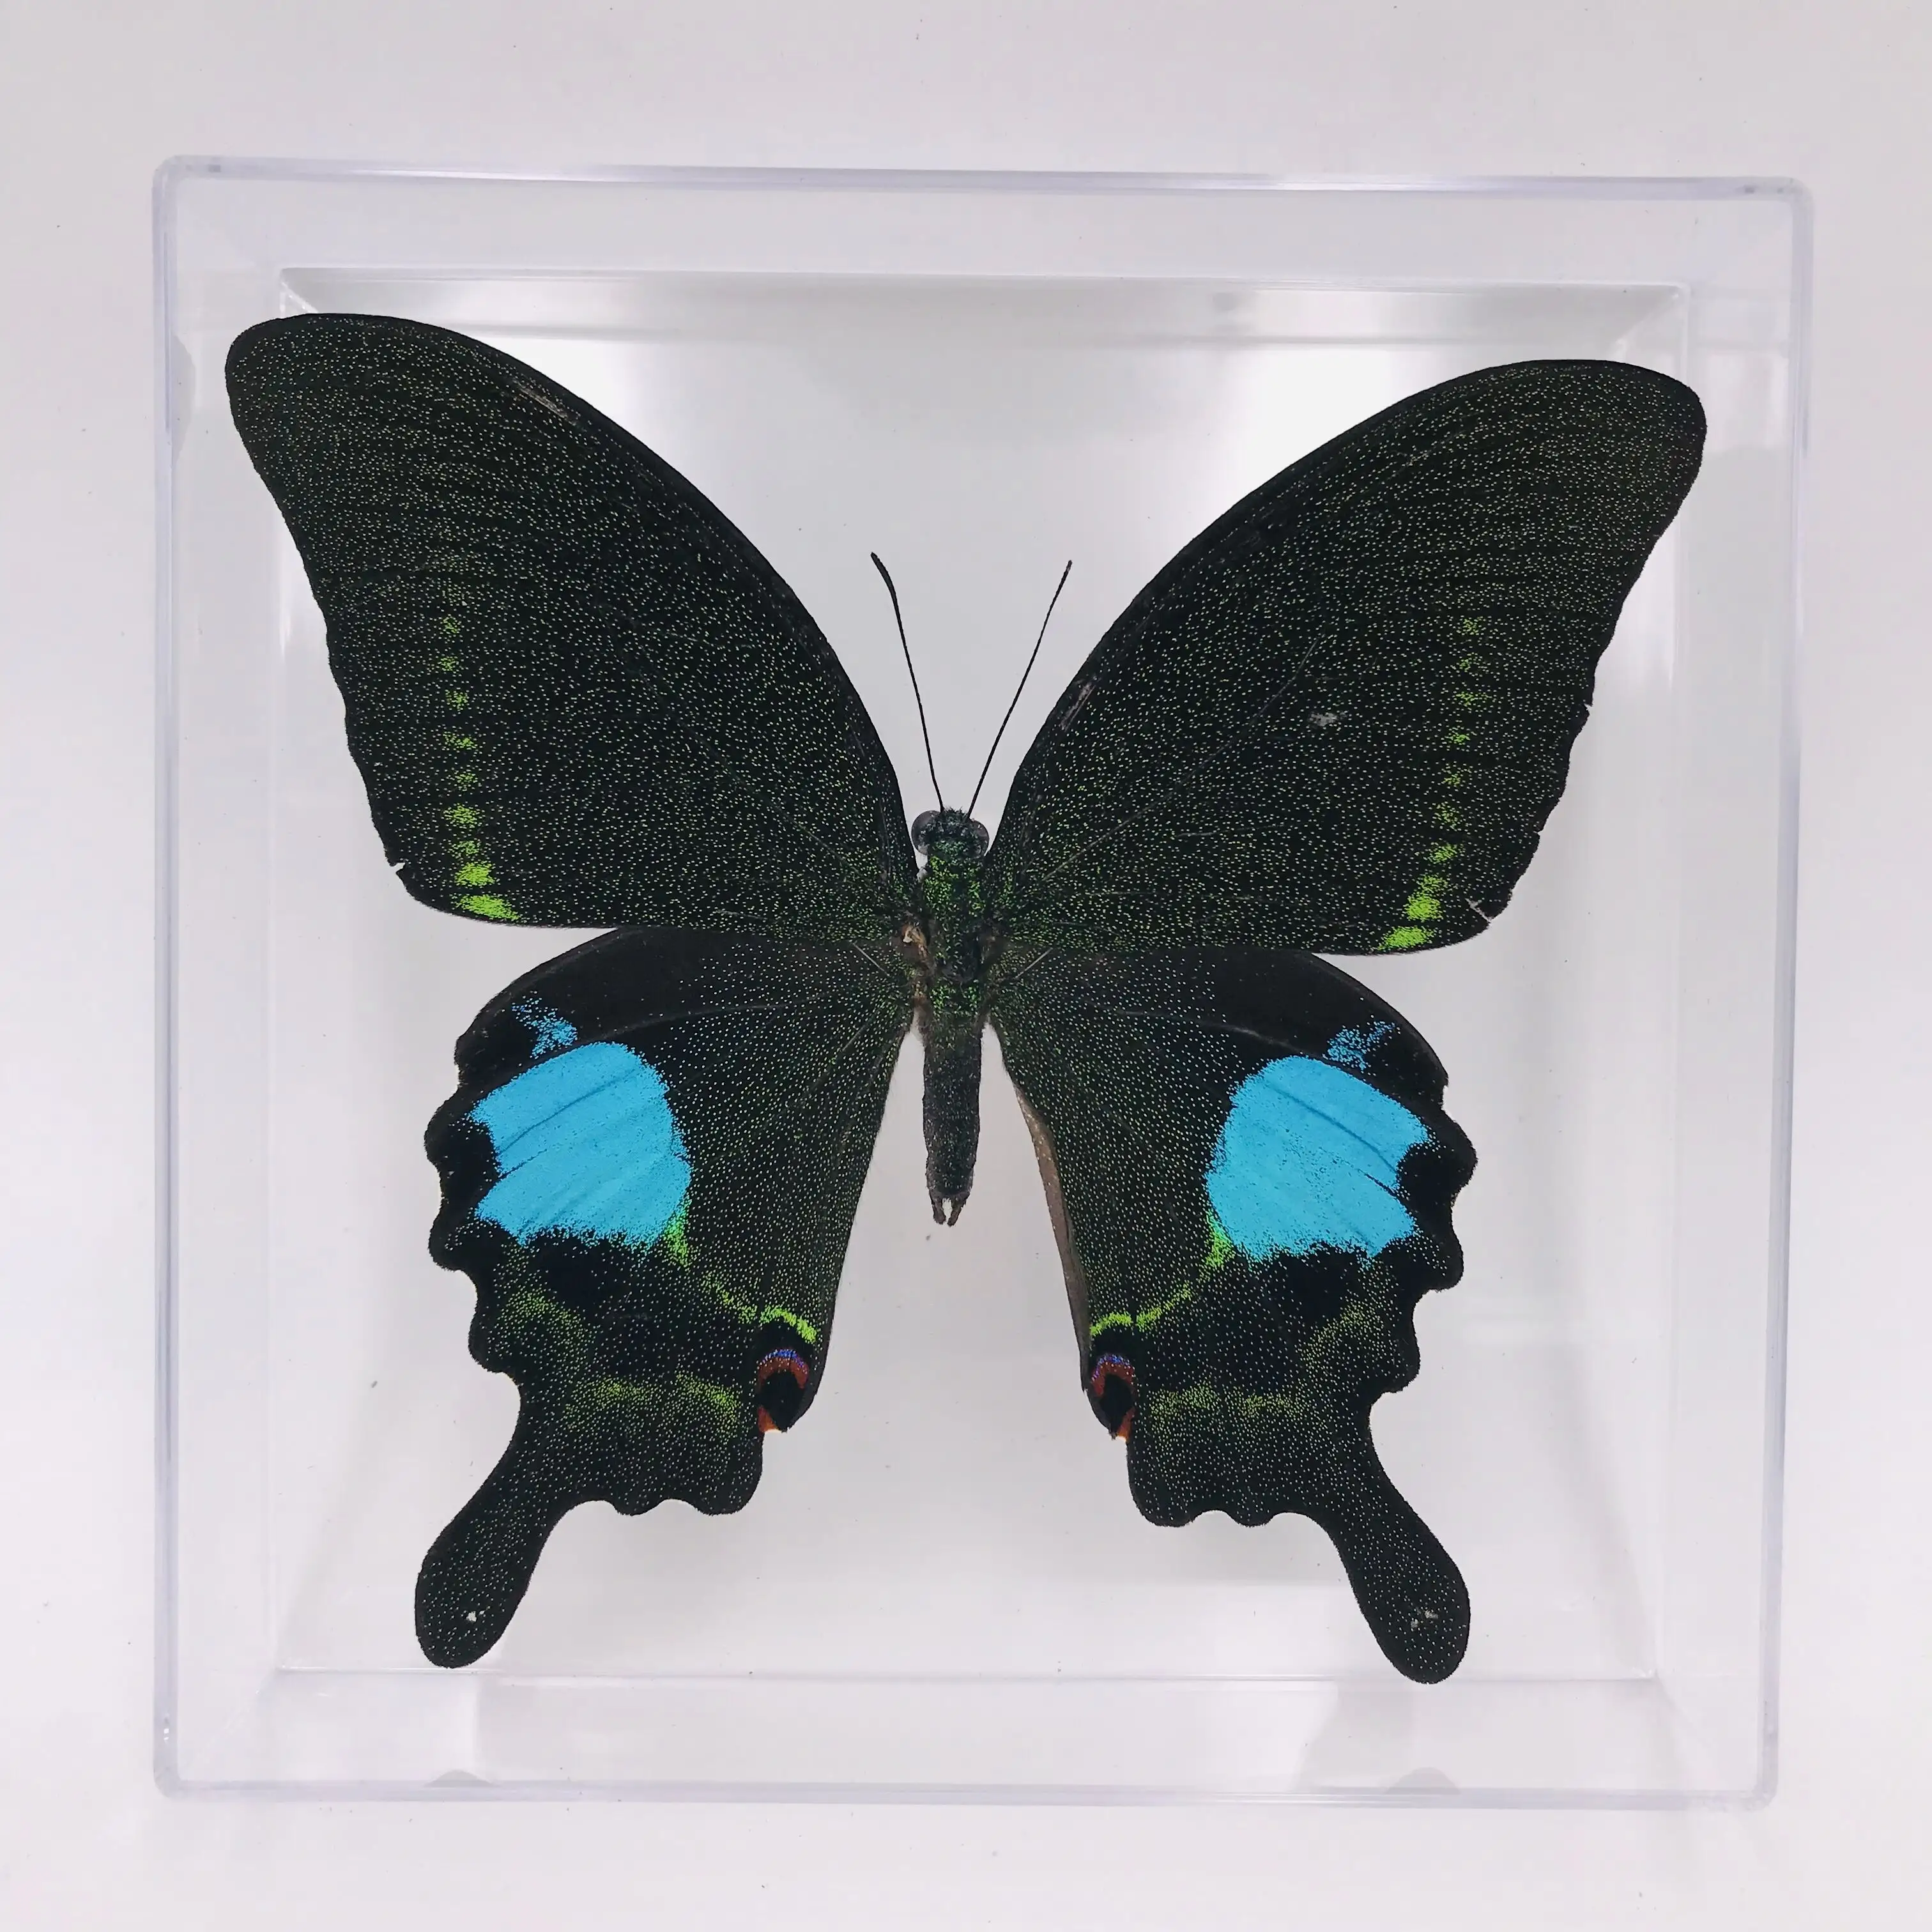 Dry Butterfly dried butterflies specimen can be placed in frame real butterfly